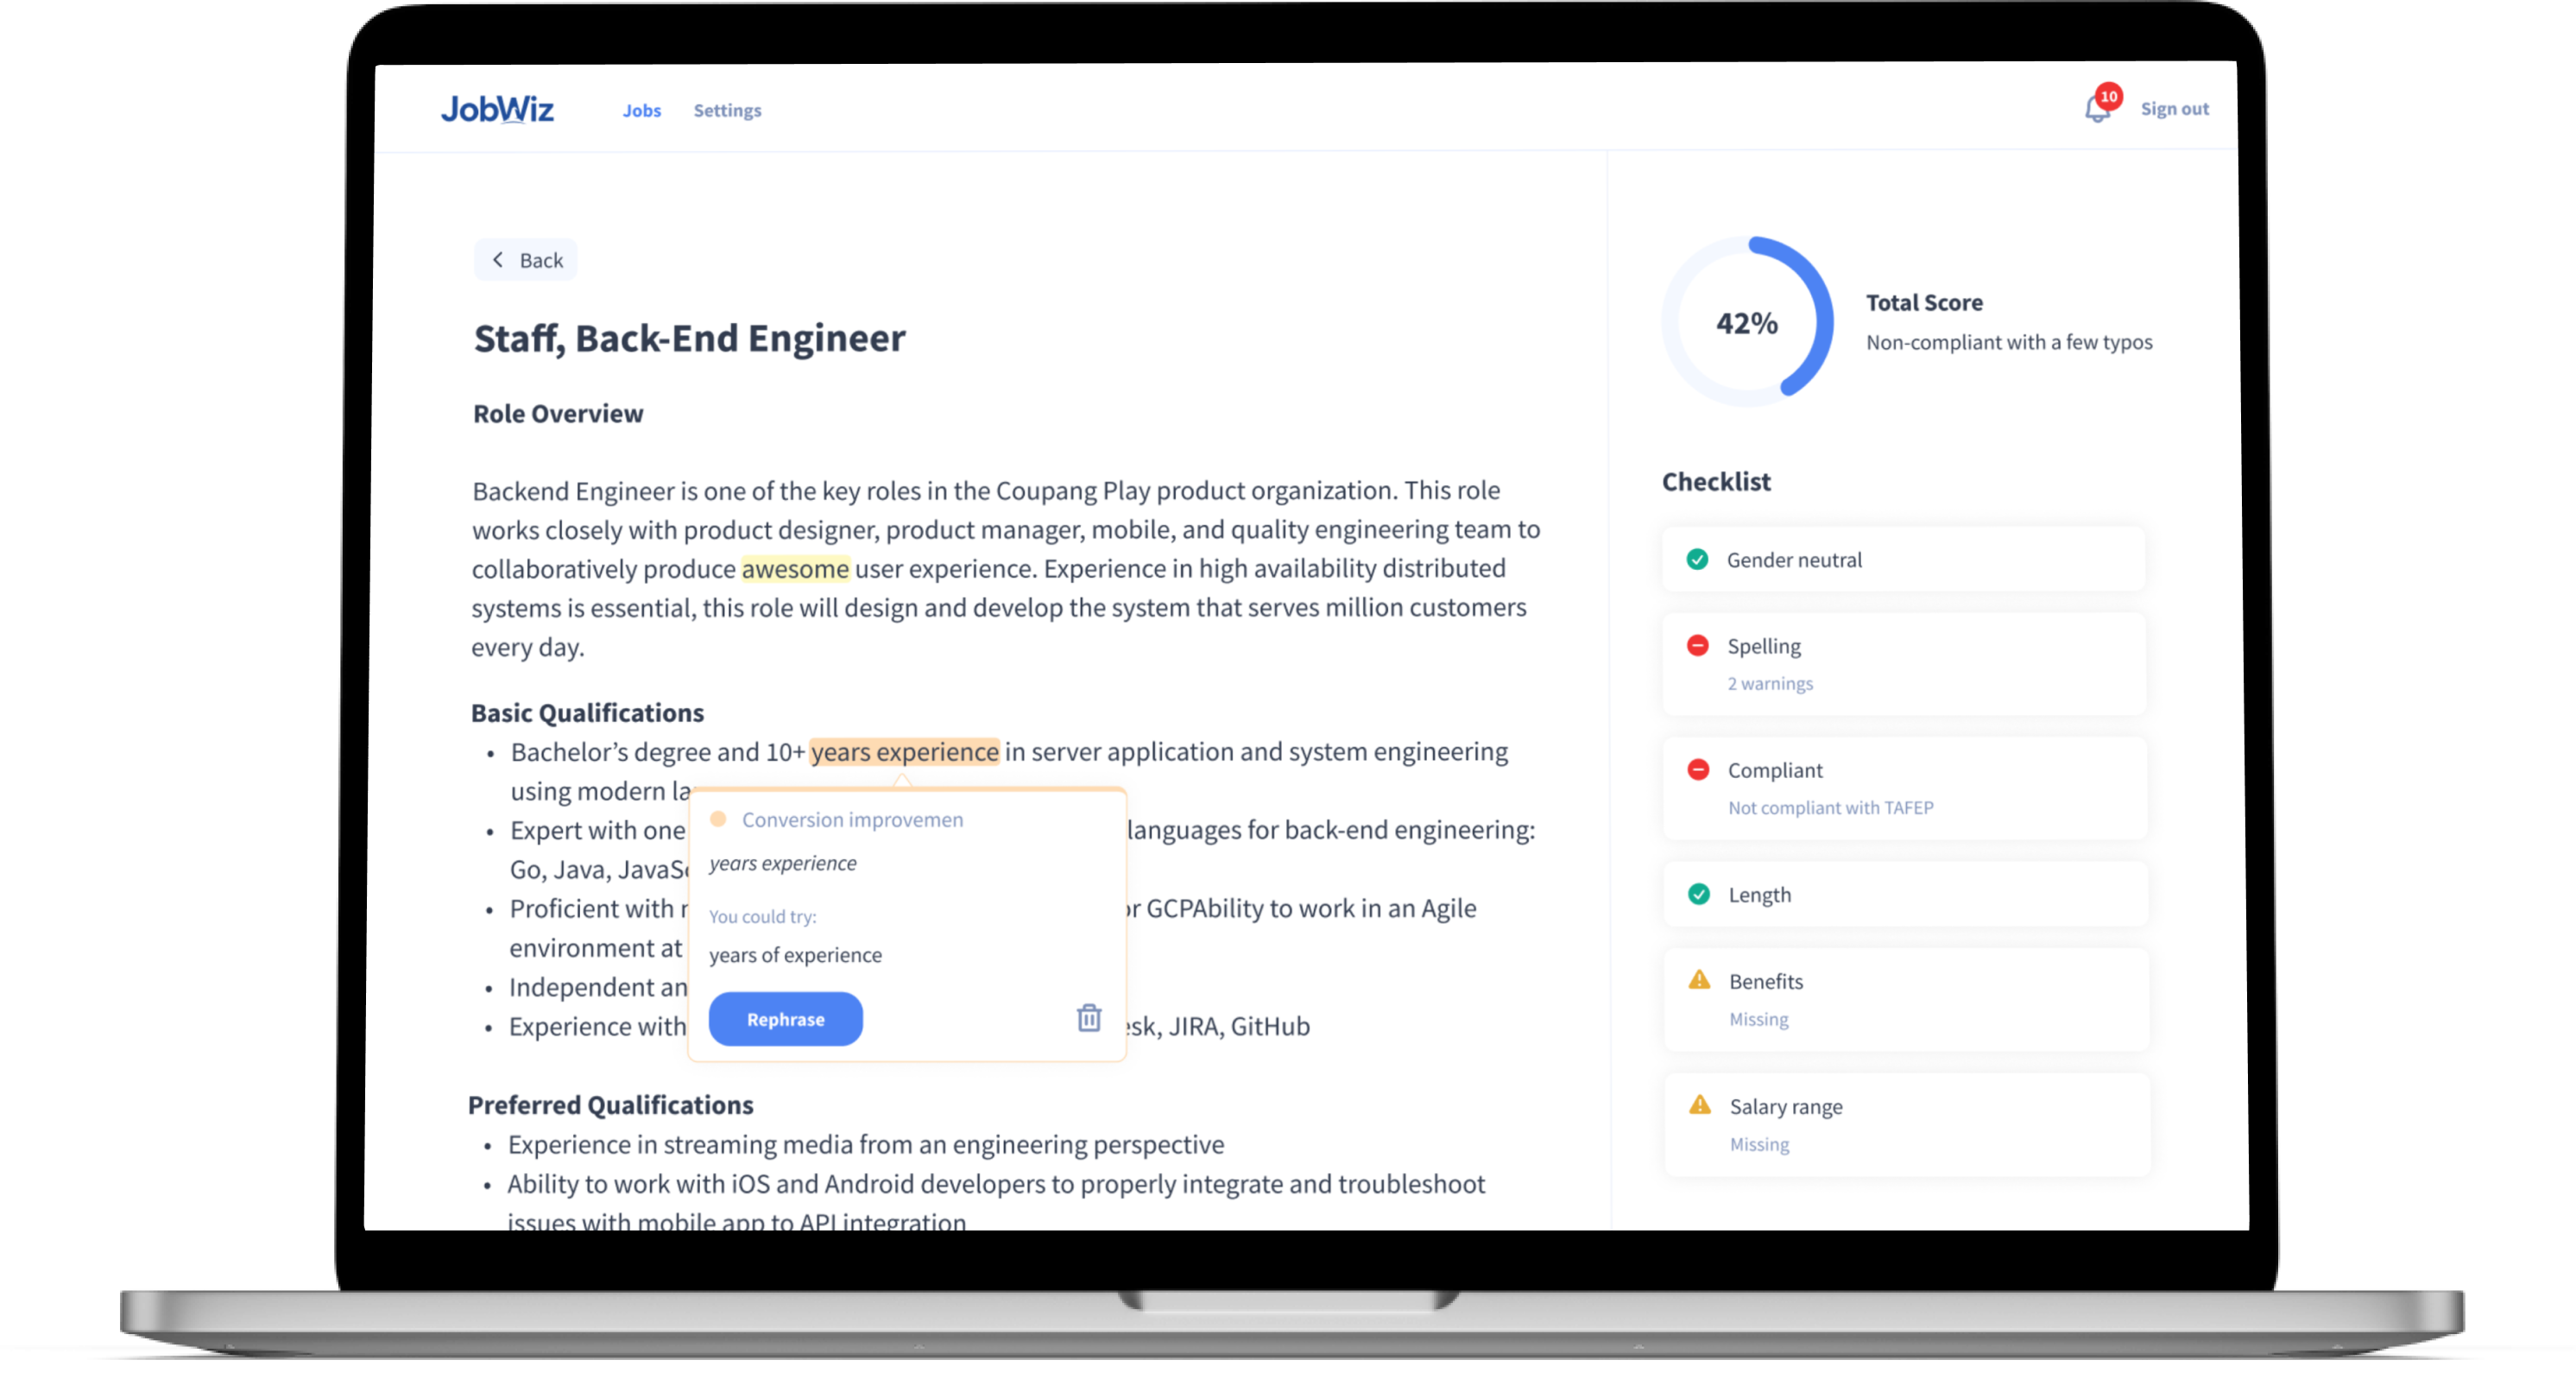 Introducing Job Description Tool: New AI Assistant To Help You Write Better Job Ads Quickly & Easily